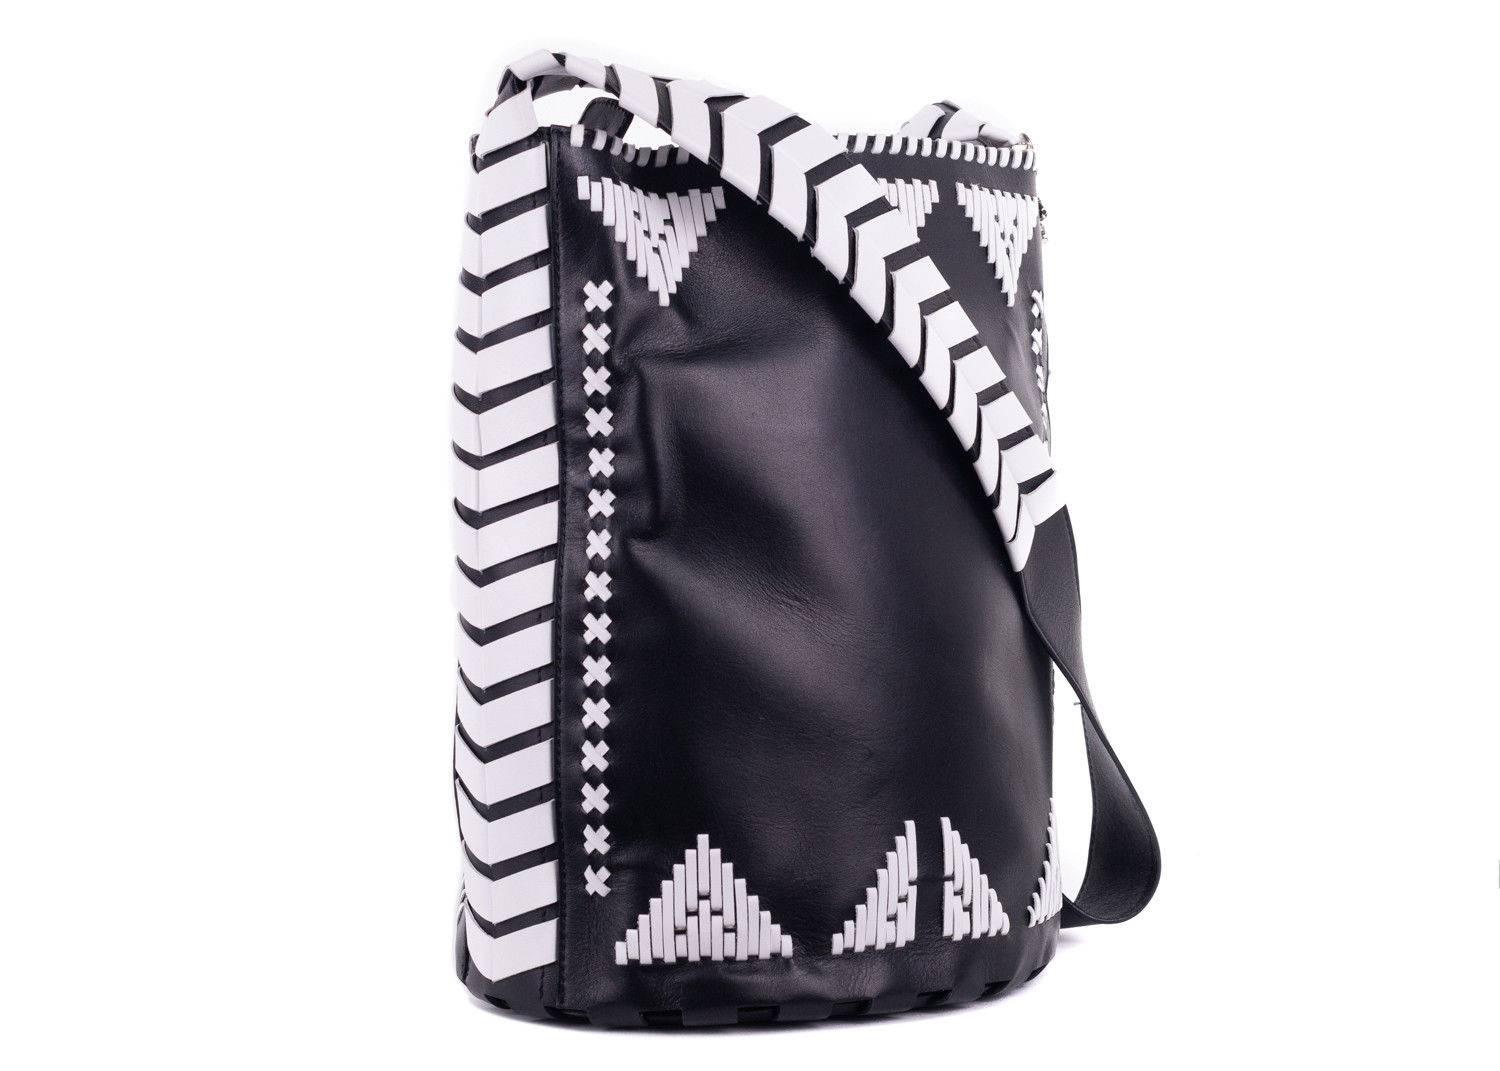 Revamp your accessories closet with this uniquely crafted shoulder bucket bag by Roberto Cavalli. This black color bag features white woven leather and elephant hardware along the shoulderline. Simply pair it with absolutely any outfit for a chic